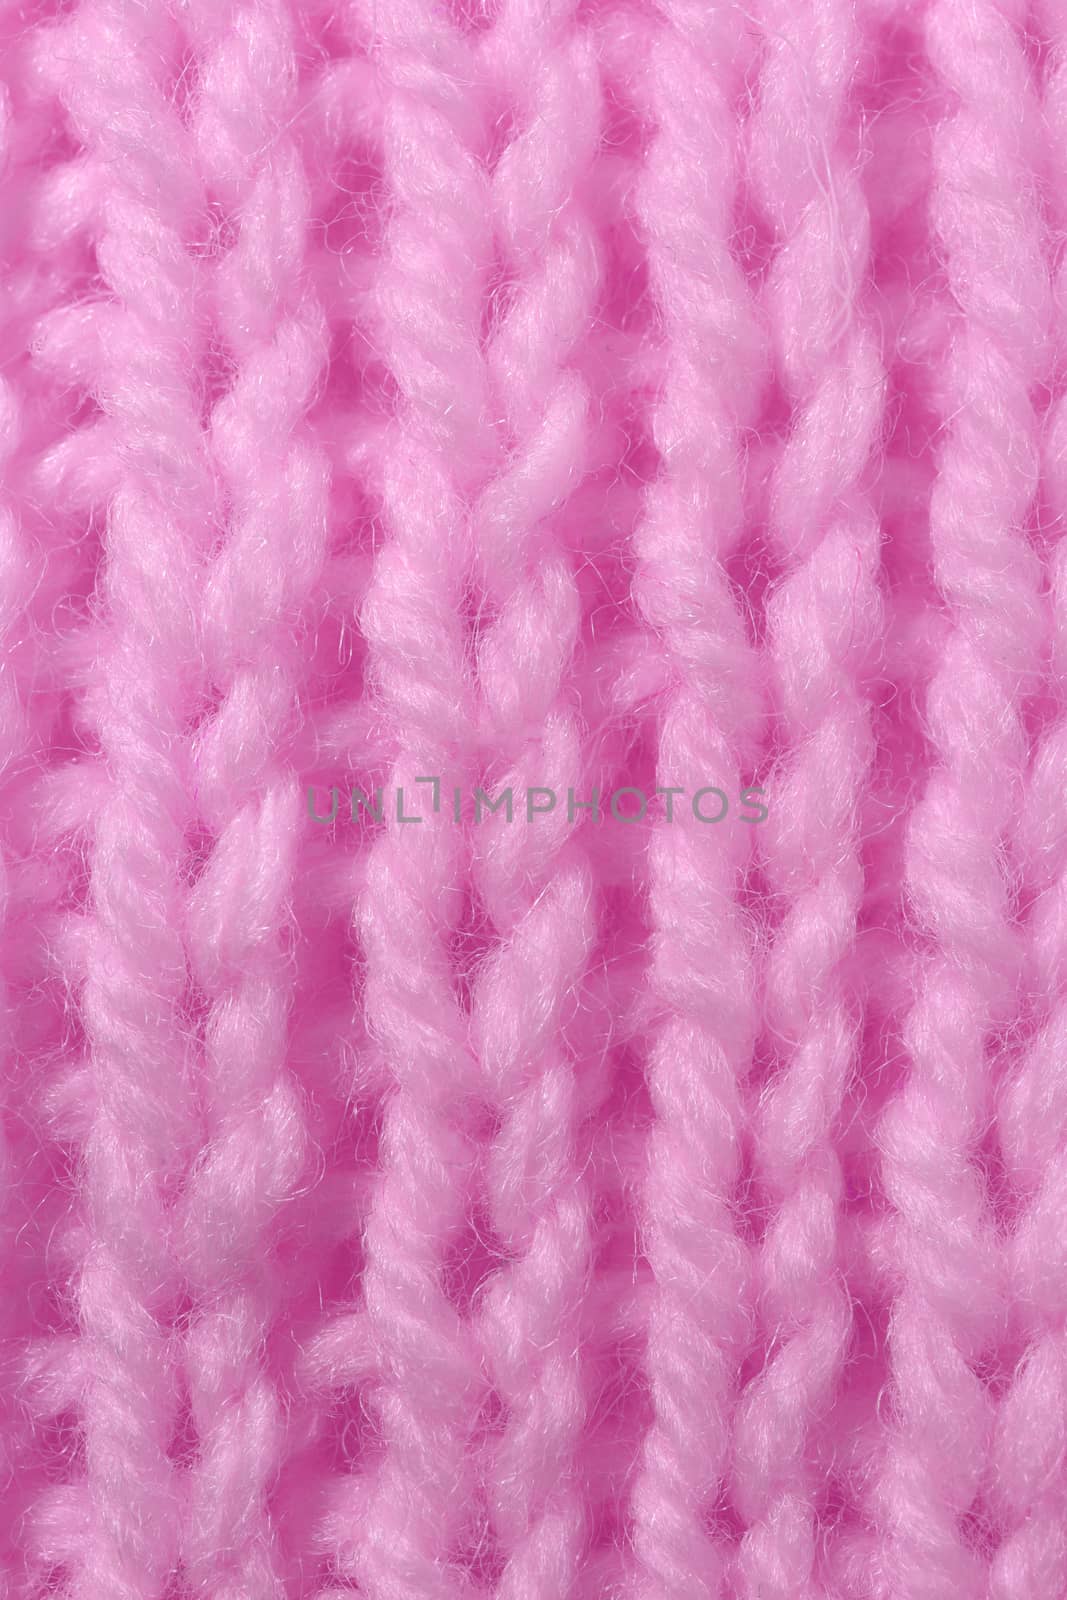 Pink Wool Knitting Texture. Vertical Across Weaving Crochet Detailed Rows. Sweater Textile Background. Macro Closeup. by sanches812